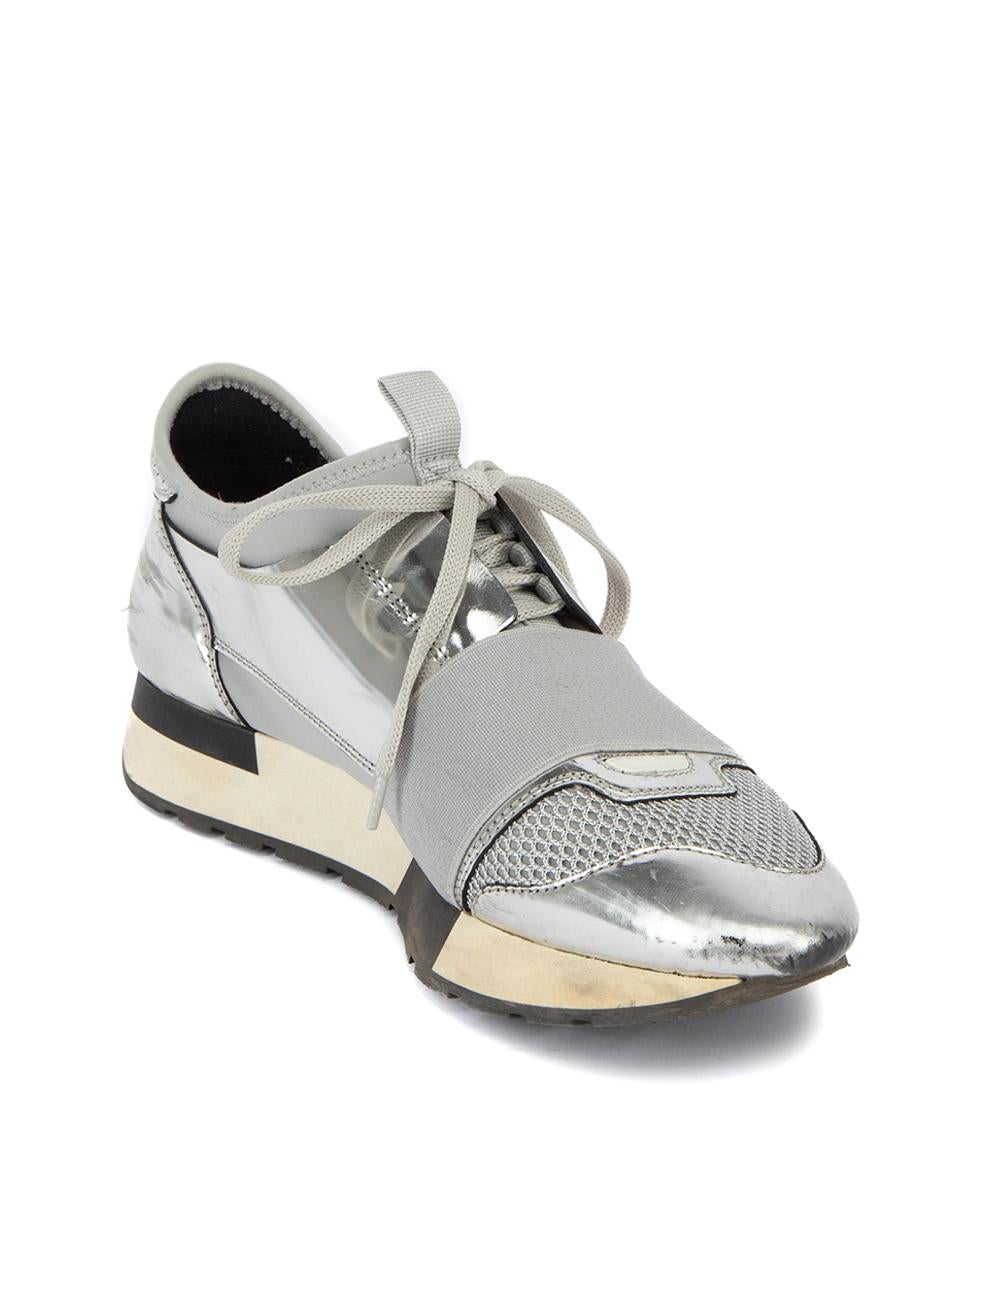 CONDITION is Good. Minor wear to trainers is evident. Light wear to silver exterior where scuffs, scratches and marks can be seen/ There is also wear to the midsole and toe point which is discoloured and has dark marks on this used Balenciaga